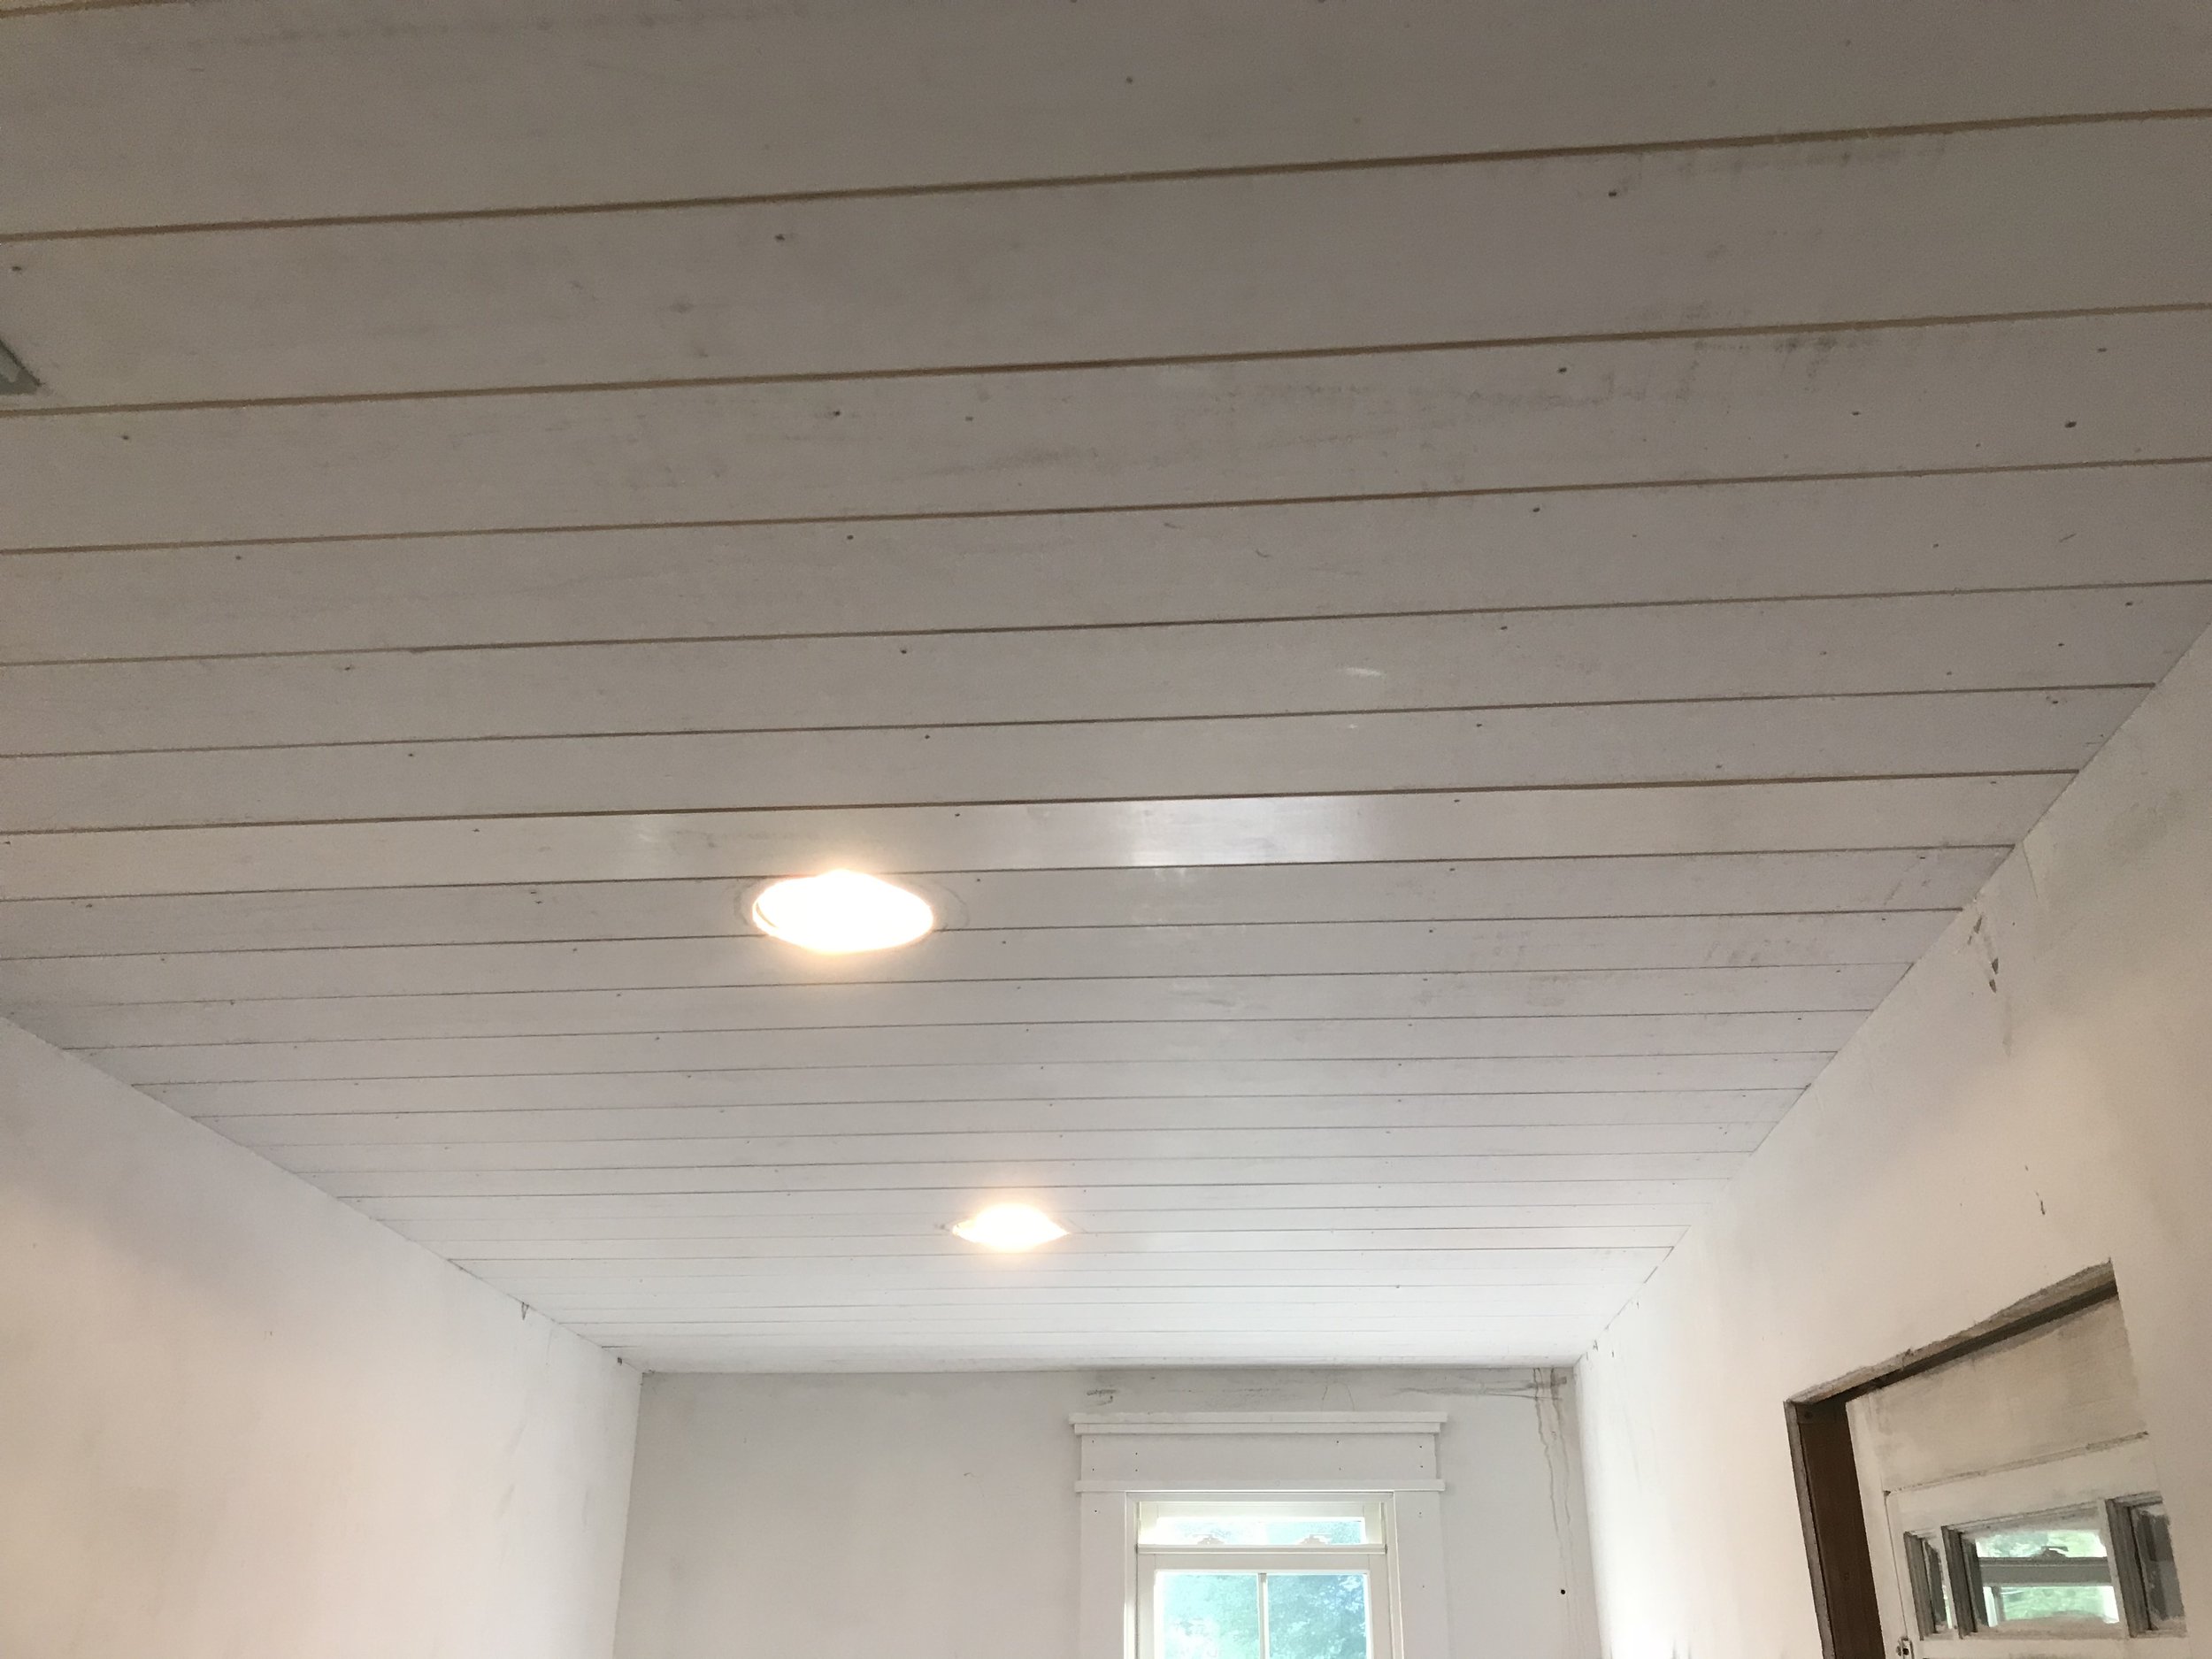  After the floors were in, I added a wainscot ceiling. This portion of our home was original a porch, and we decided to maintain that character when we renovated, hence the brick floors and this ceiling.  